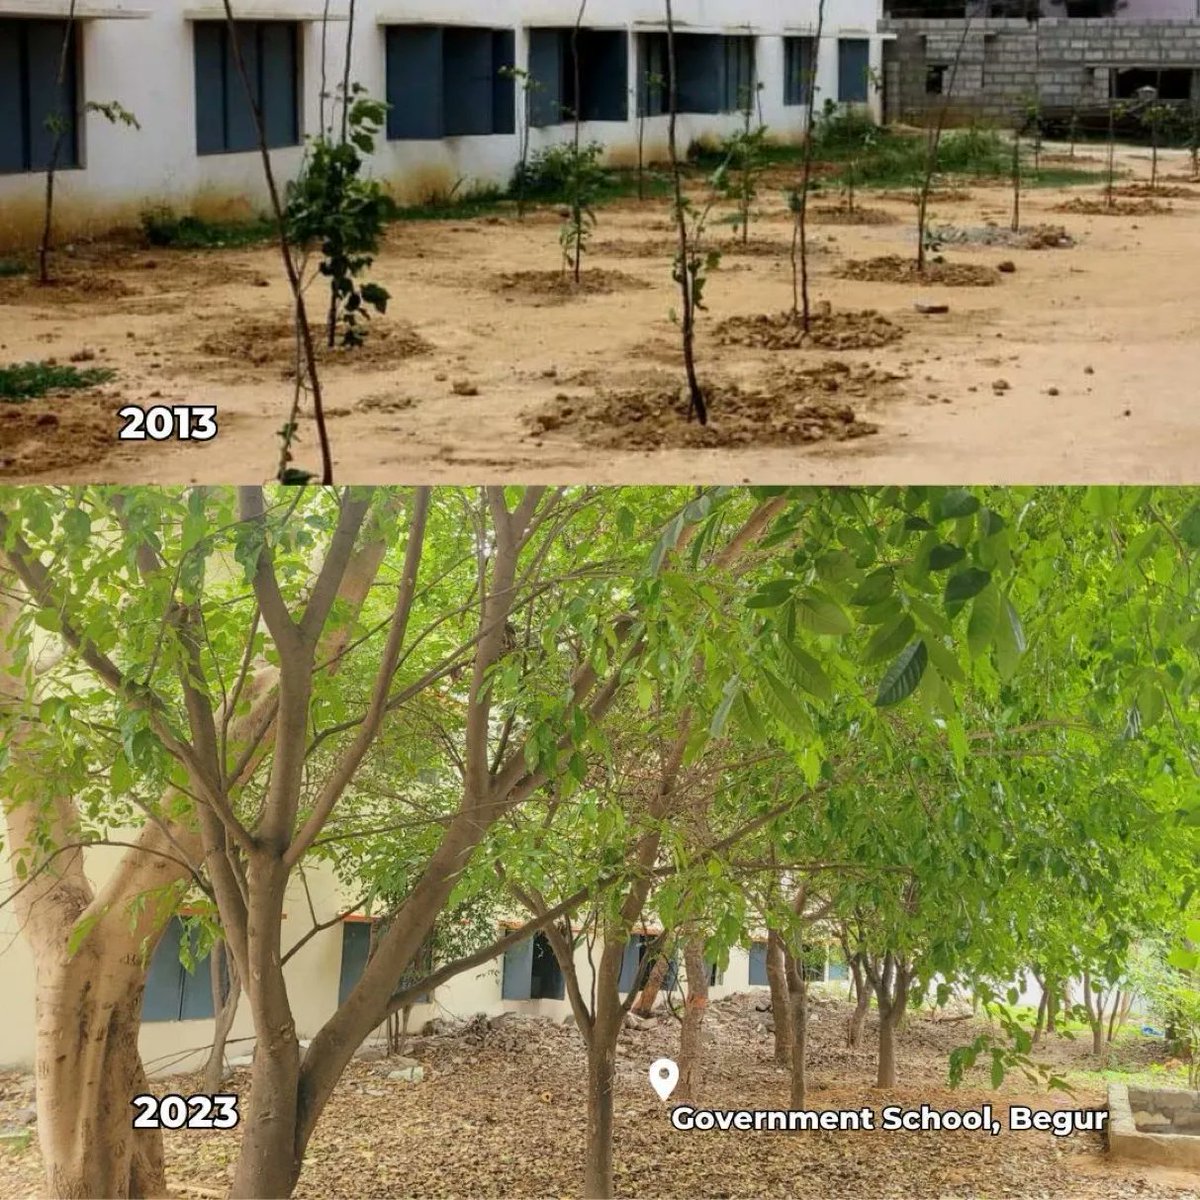 Well done!

This is Govt. School in Begur, Bengaluru, India 🇮🇳, where @saytrees_ind planted 100+ saplings is 2013. 

Special thanks to all volunteers who joined to plant these saplings and to students from the school who took regular care of the saplings. 

@kapil_saytrees